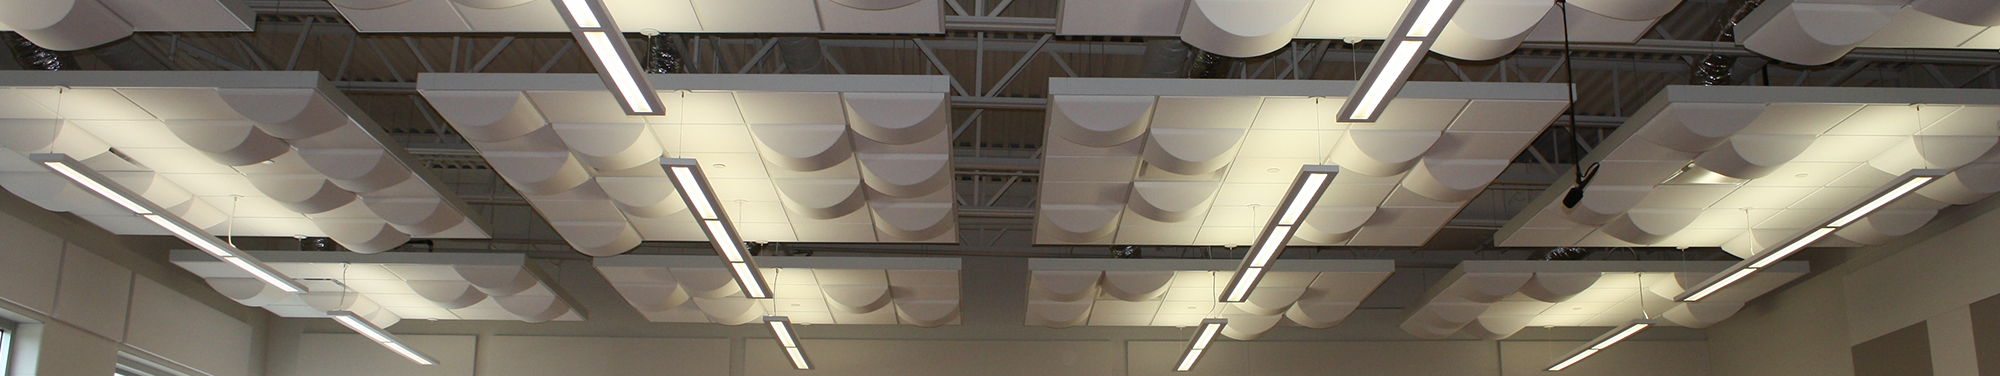 Speciality Accoustical Ceiling Tiles